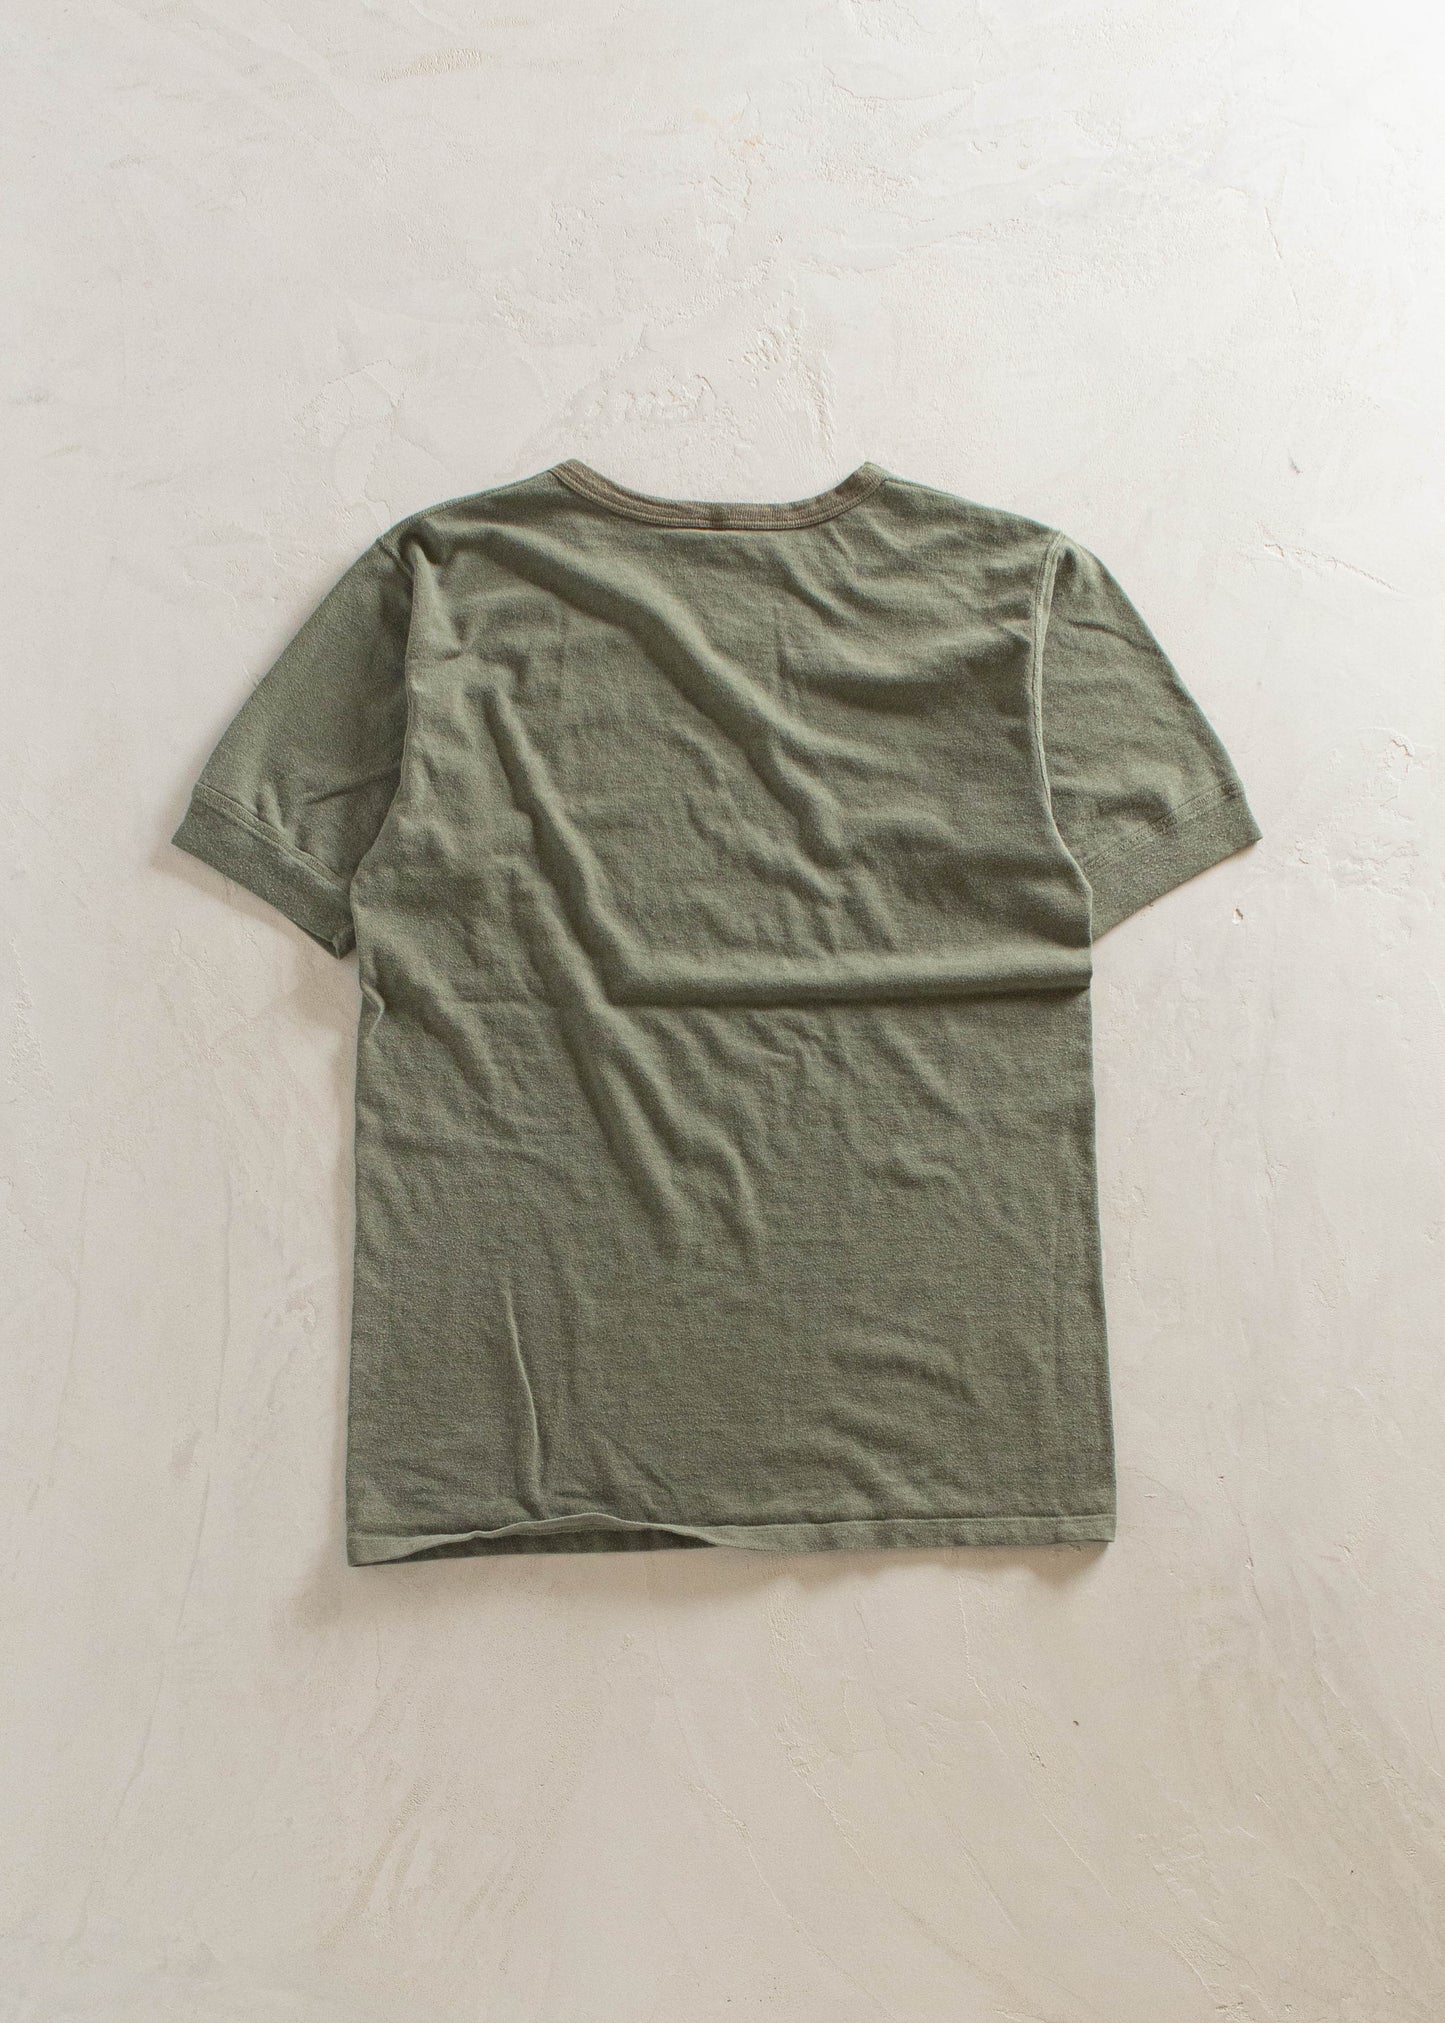 1980s Military T-Shirt Size S/M